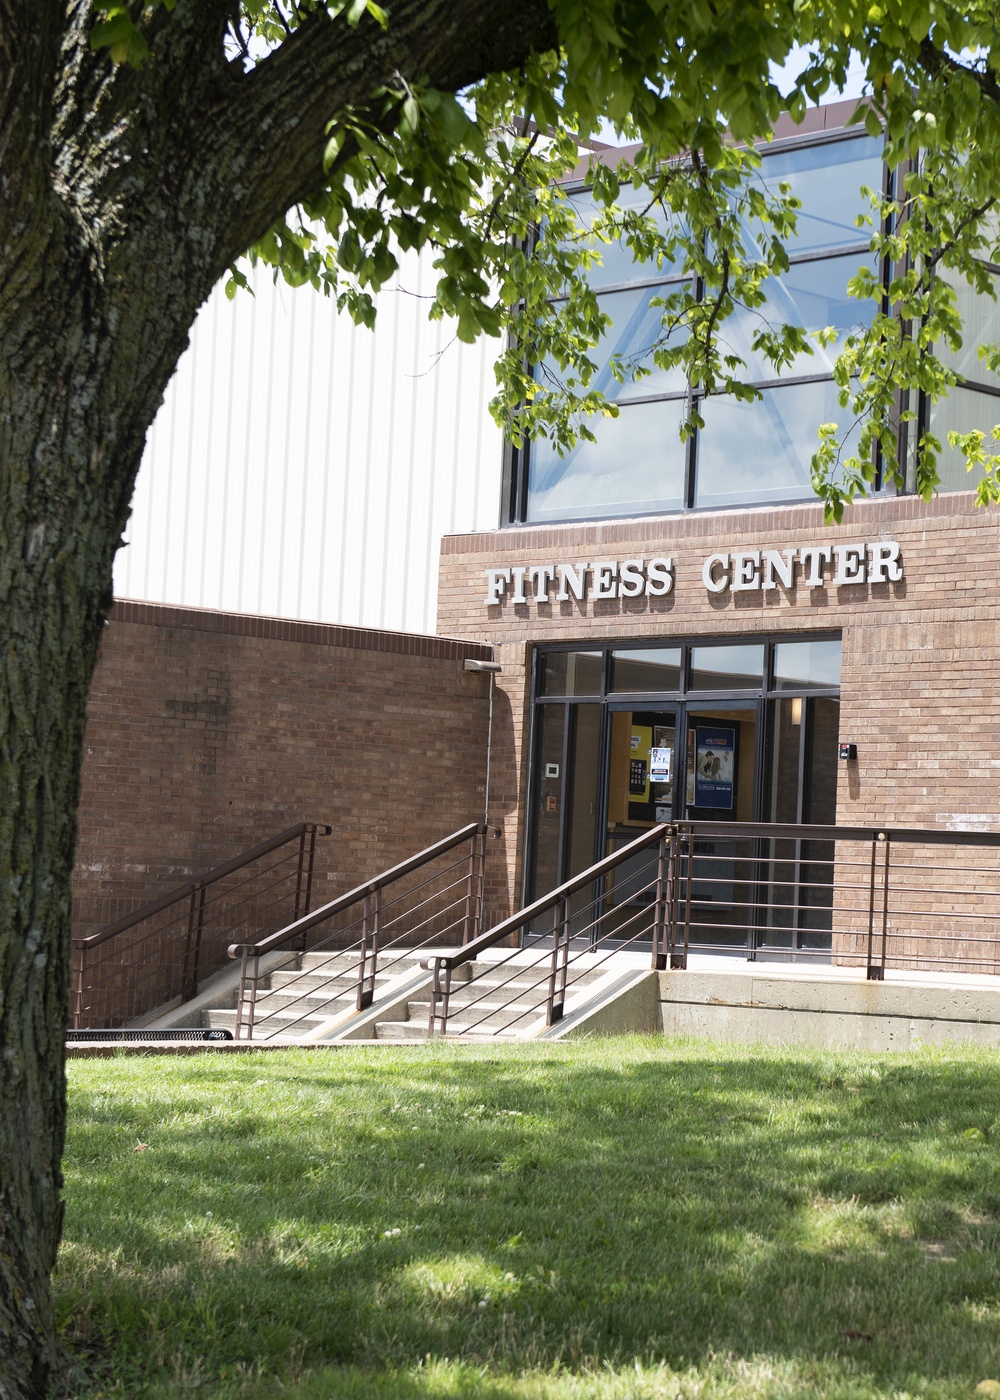 Whiteman AFB Fitness Center renovations continue